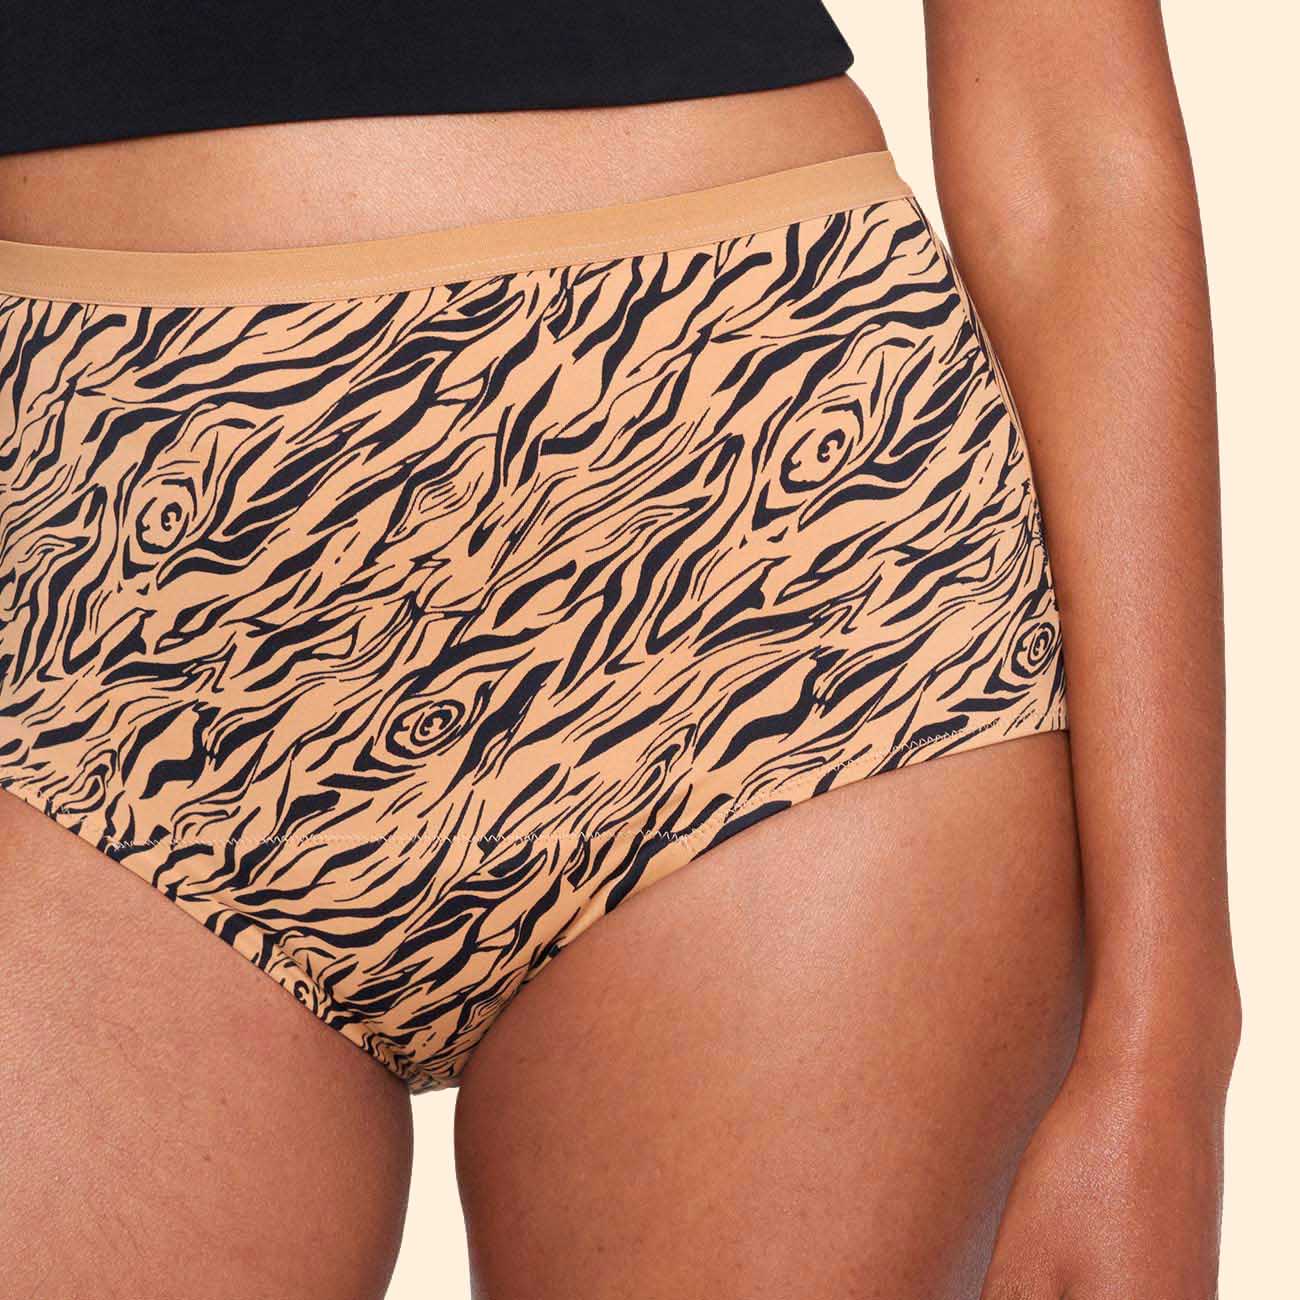 Speax: Pee Proof Underwear in Sizes 4XL and 5XL - Ready To Stare